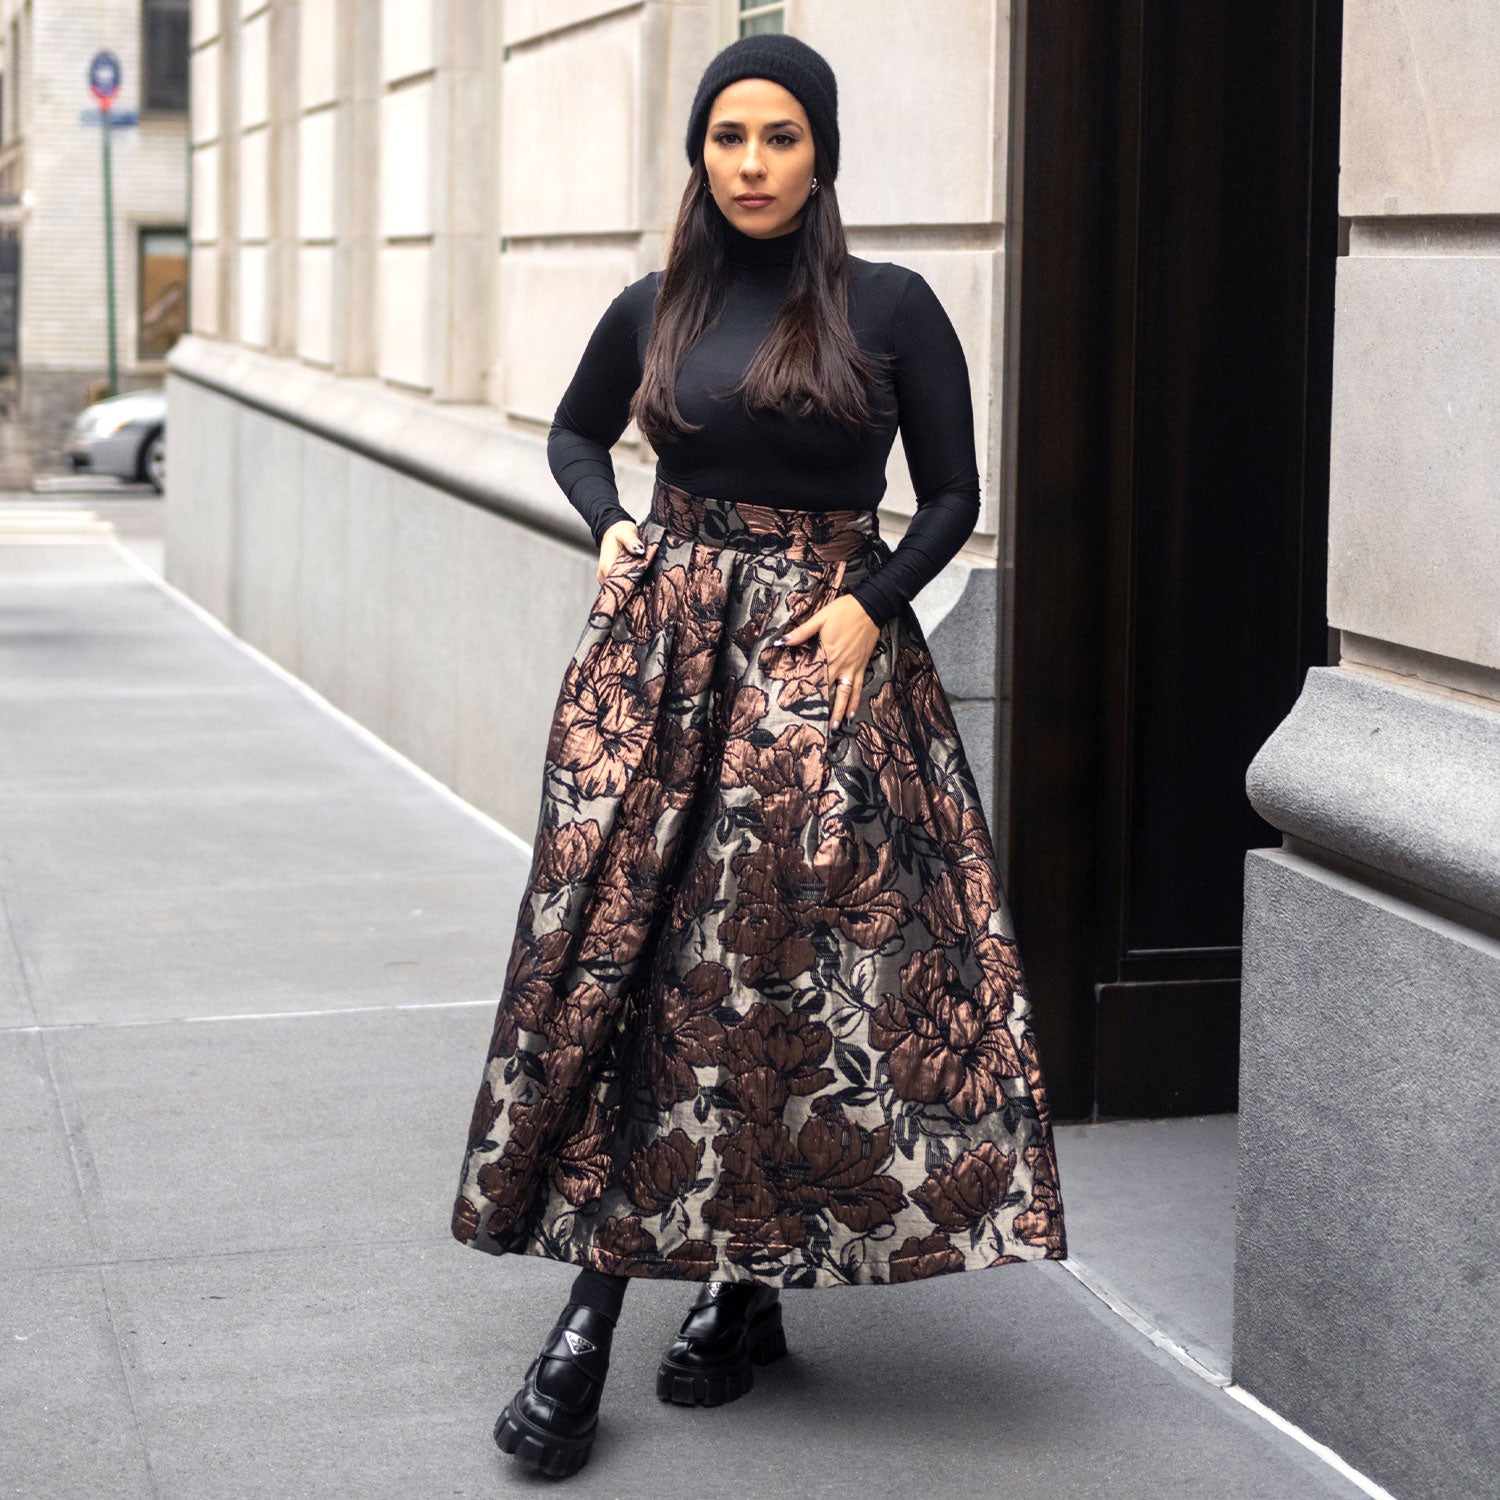 Floral Brocade Midi Skirt in Bronze and Black